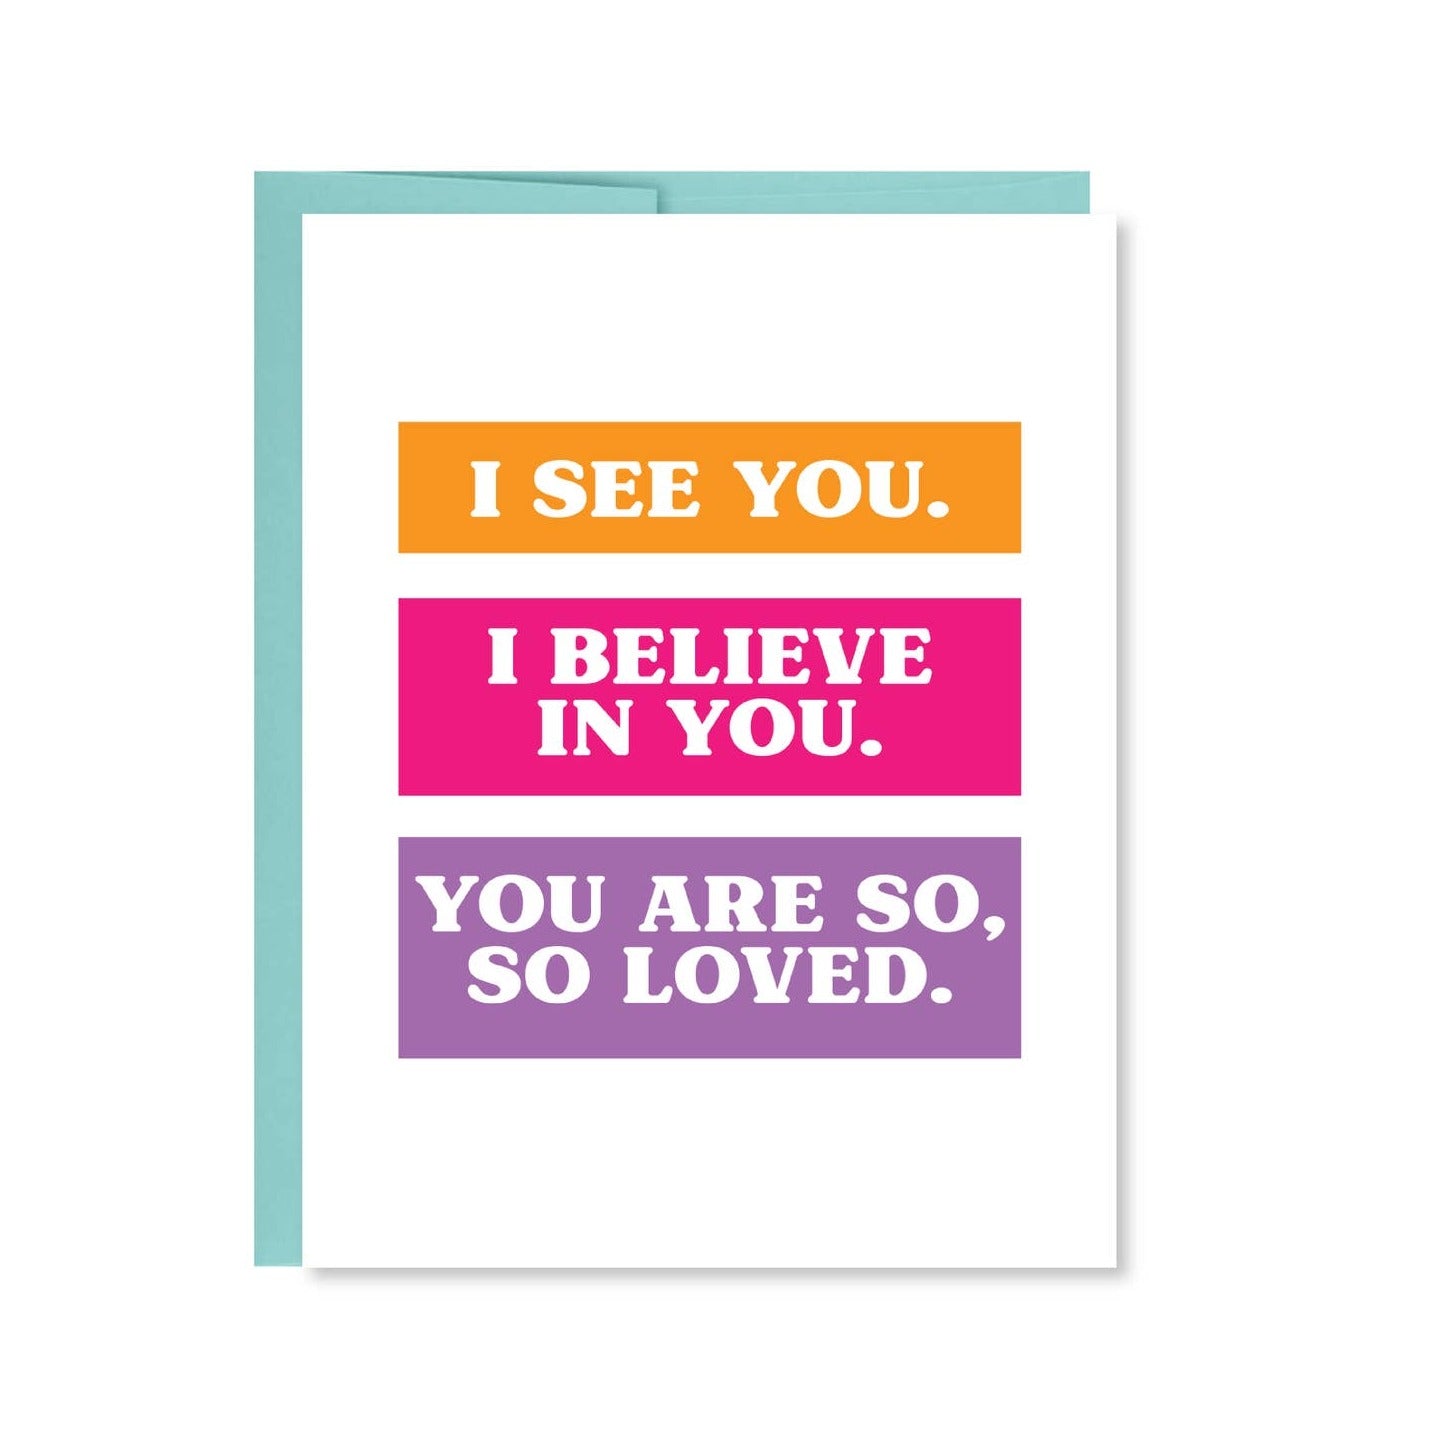 Believe in You Card - Favorite Little Things Co